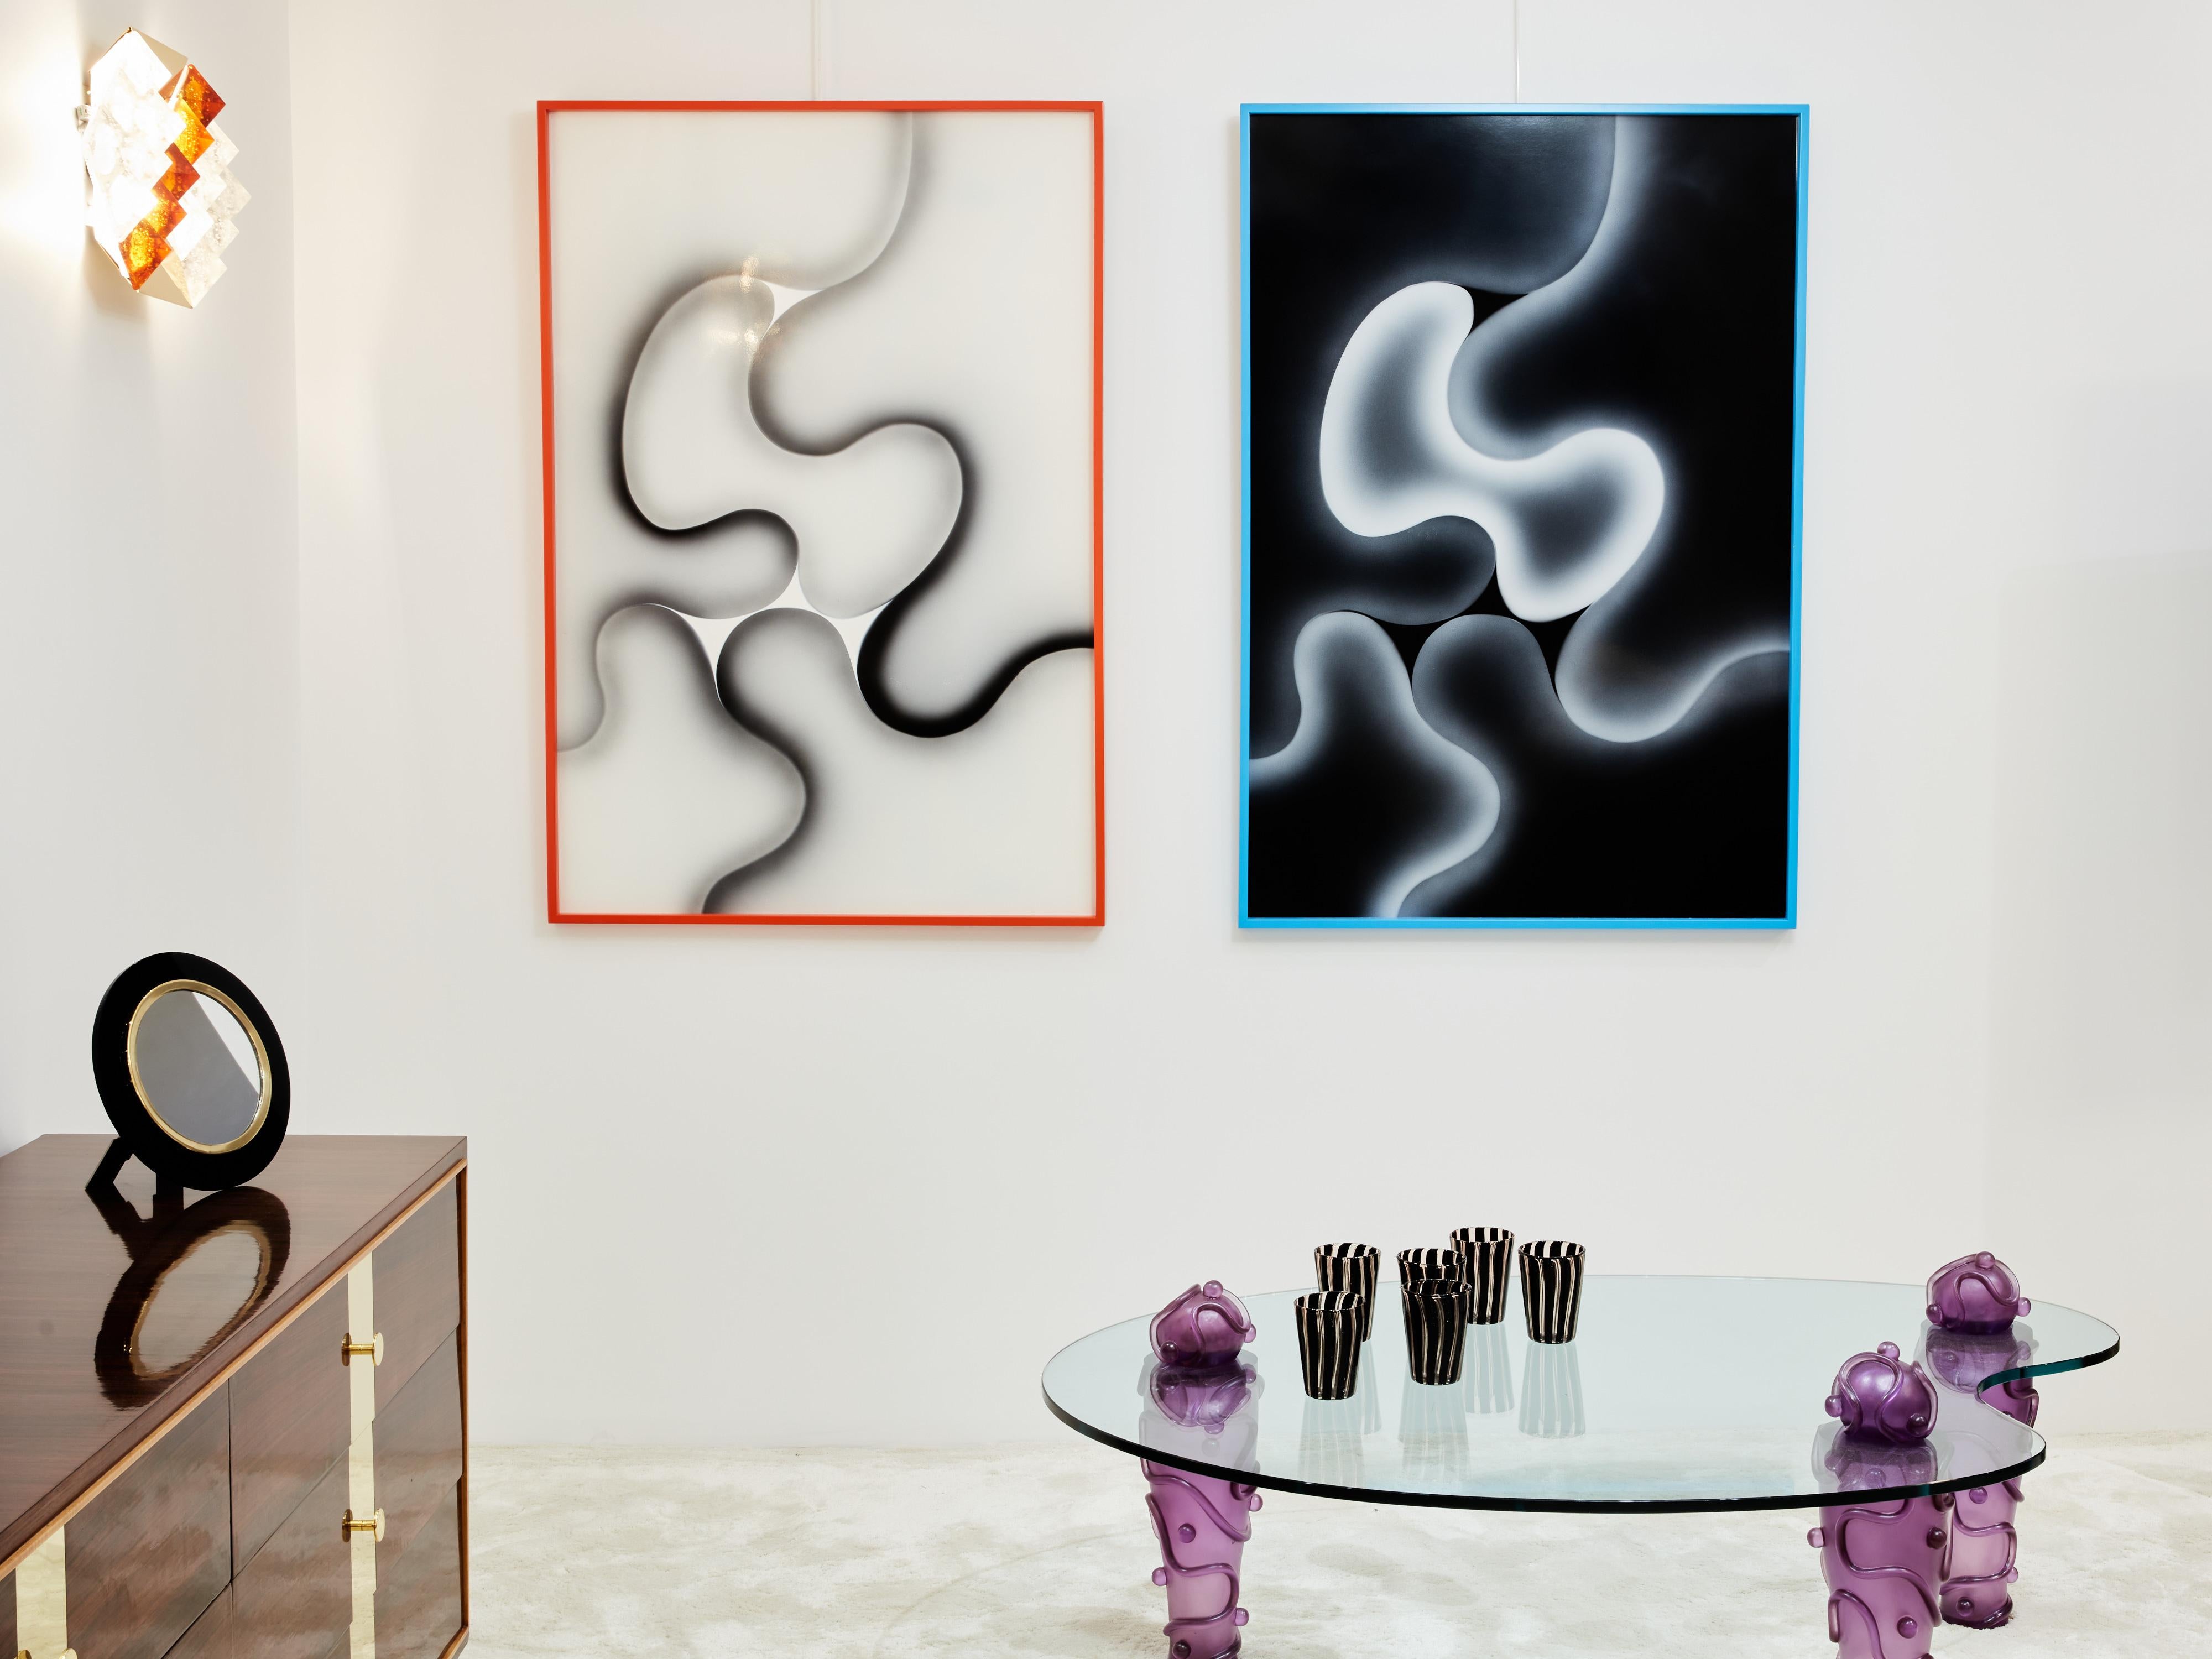 This unique composition, conceived by Les Simonnet, dates back to 1996. Crafted on lucite, the two paintings are nestled within painted wooden shadow boxes. The abstract forms are mirrored from one painting to the other in negative space, while the